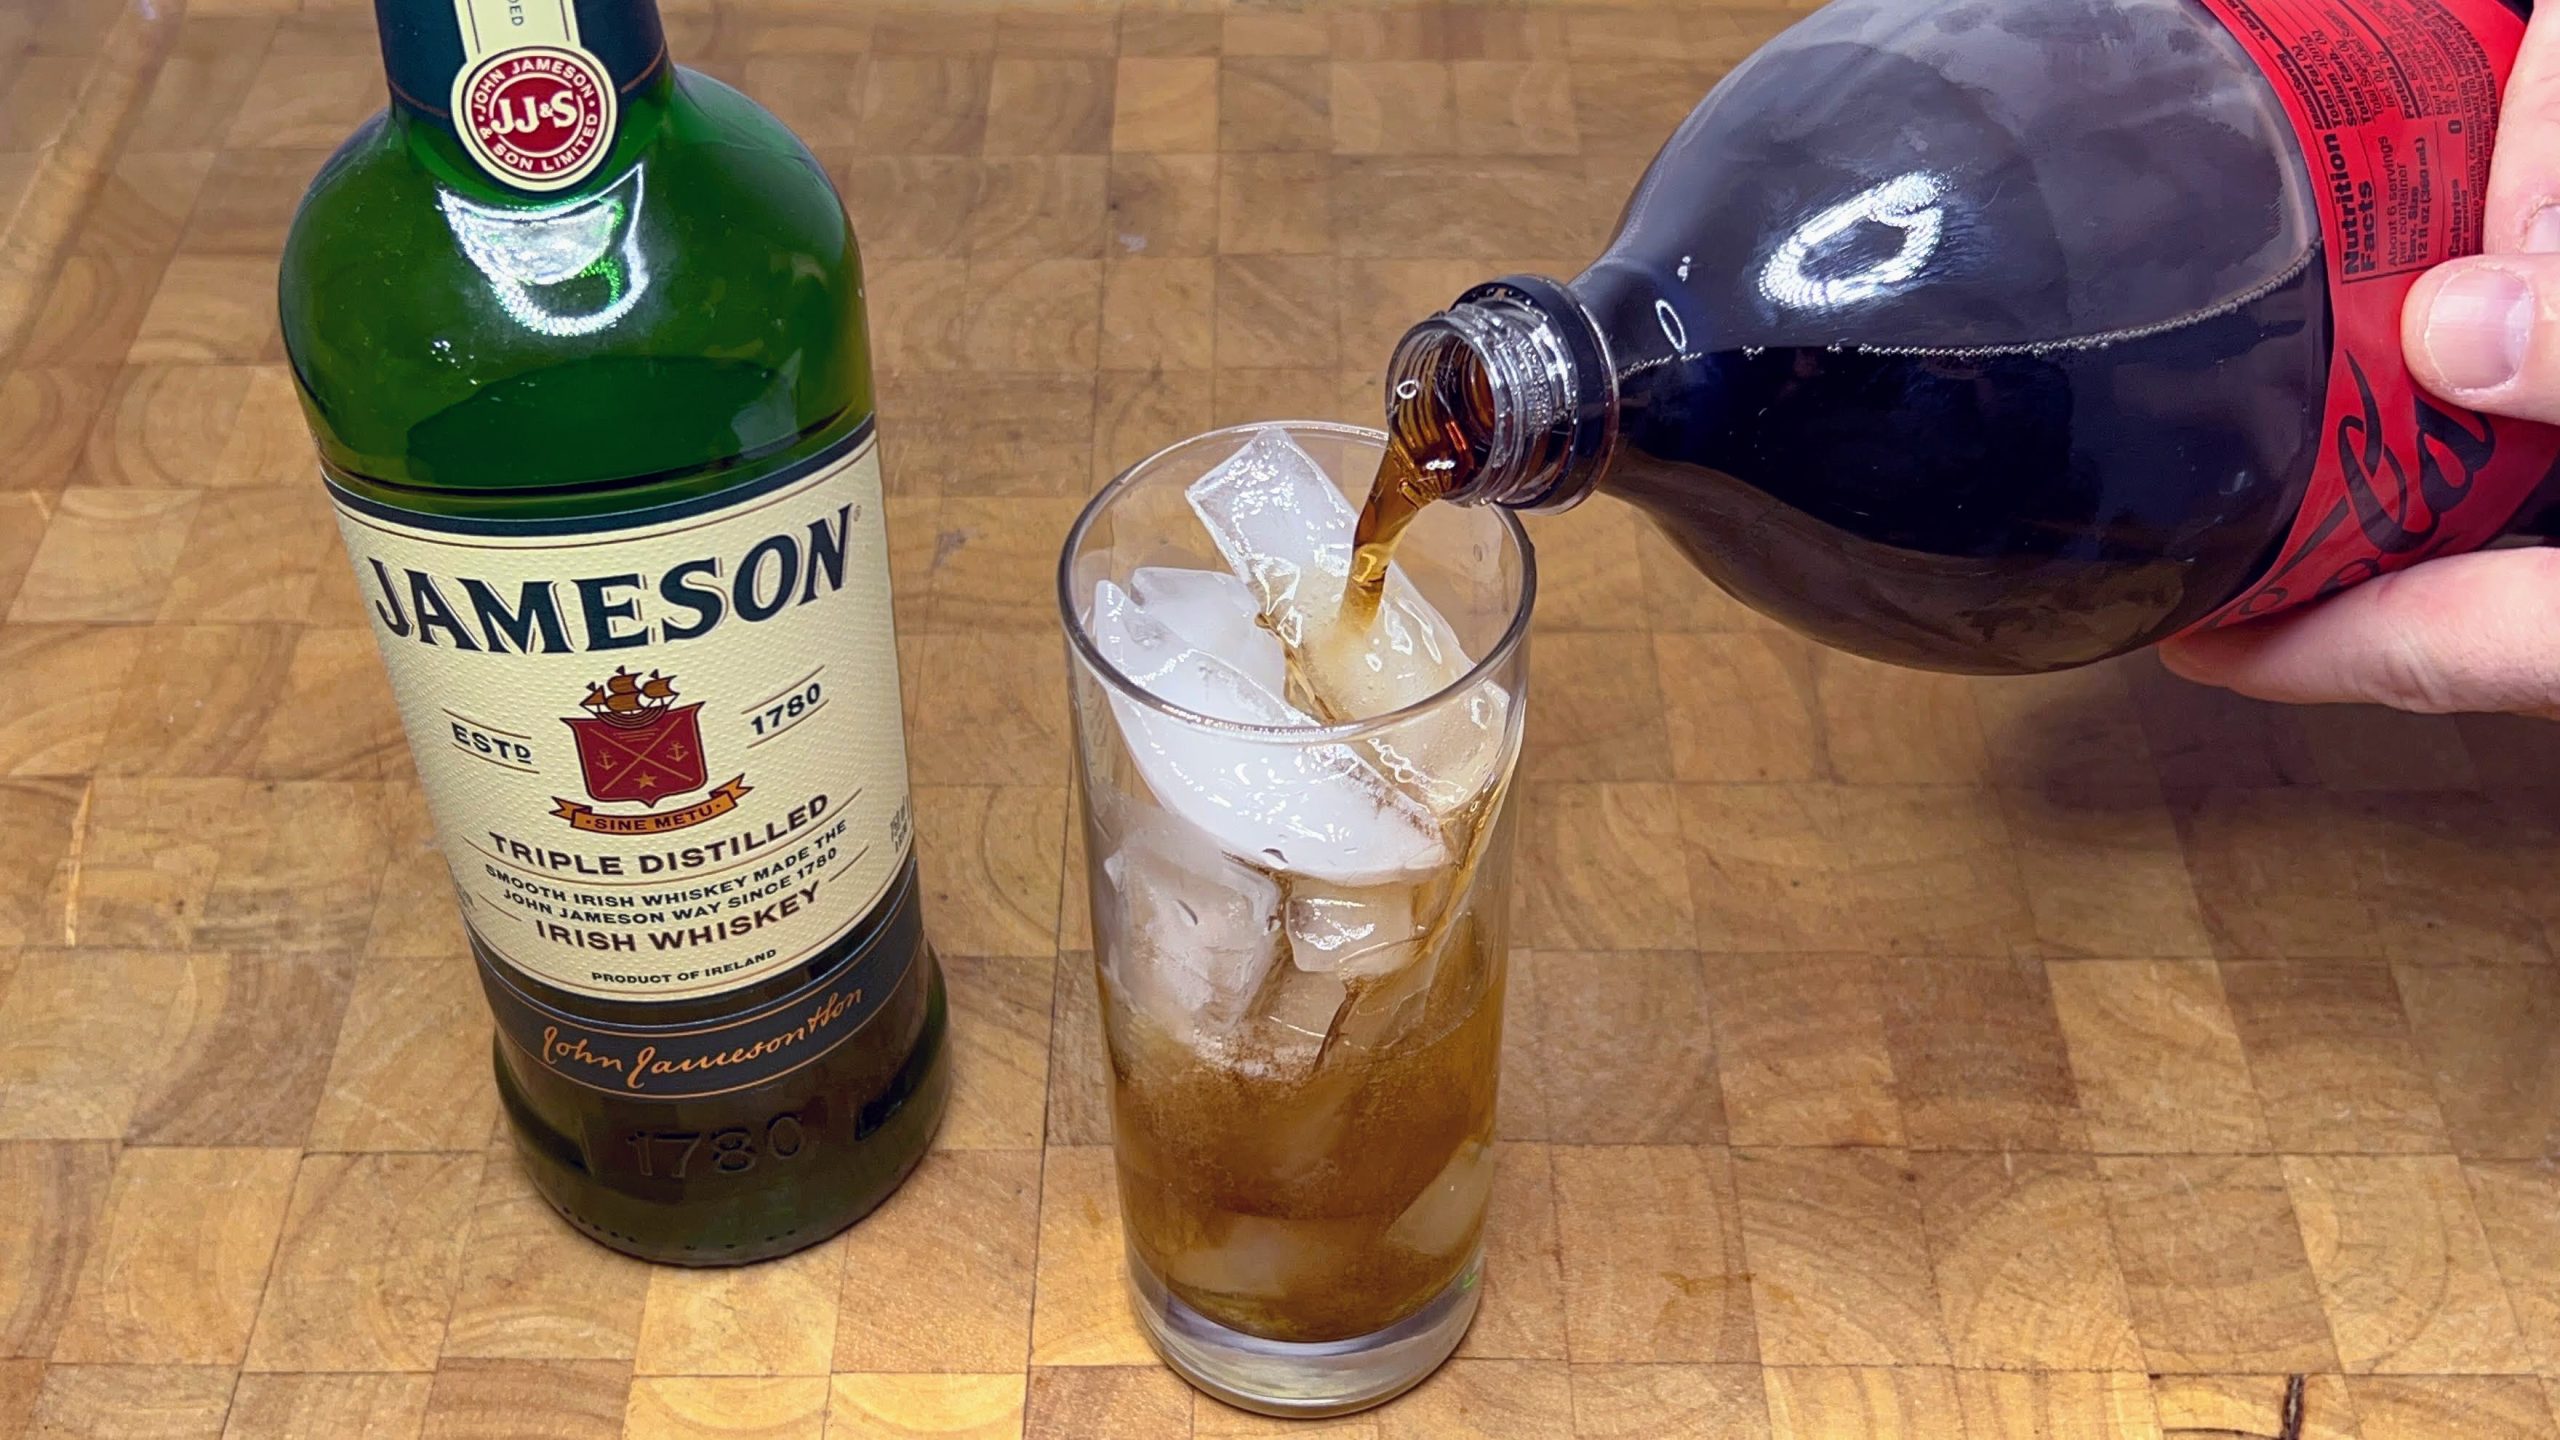 pouring coke into highball glass with jamesons